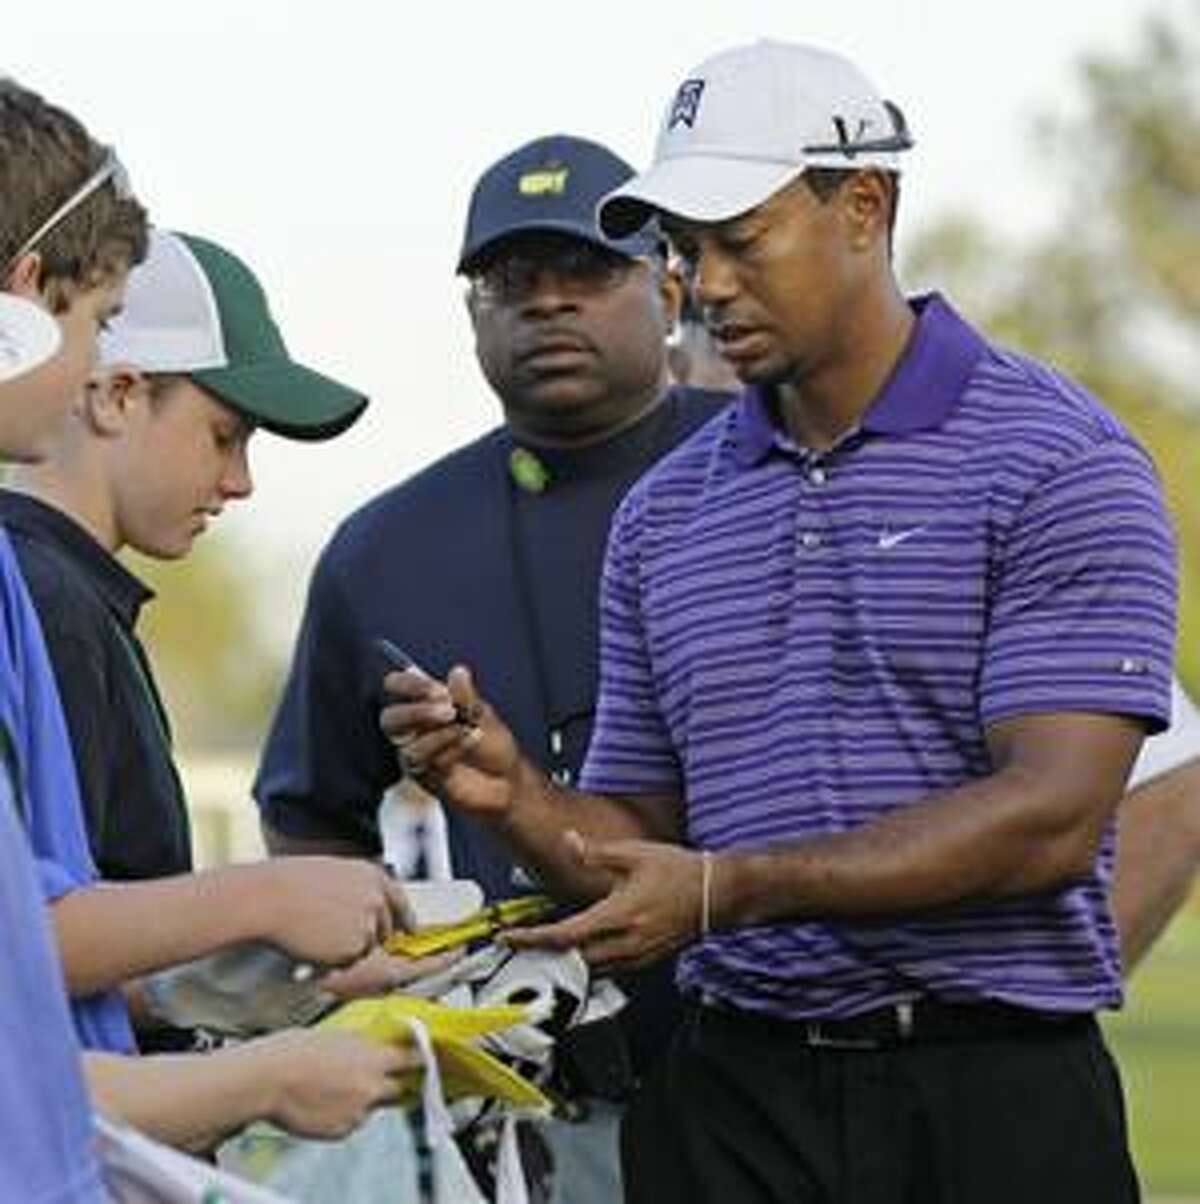 Tiger Woods signs autographs before his practice round at the Masters golf tournament in Augusta, Ga., Wednesday, April 7, 2010. The tournament begins Thursday, April, 8. (AP Photo/David J. Phillip)